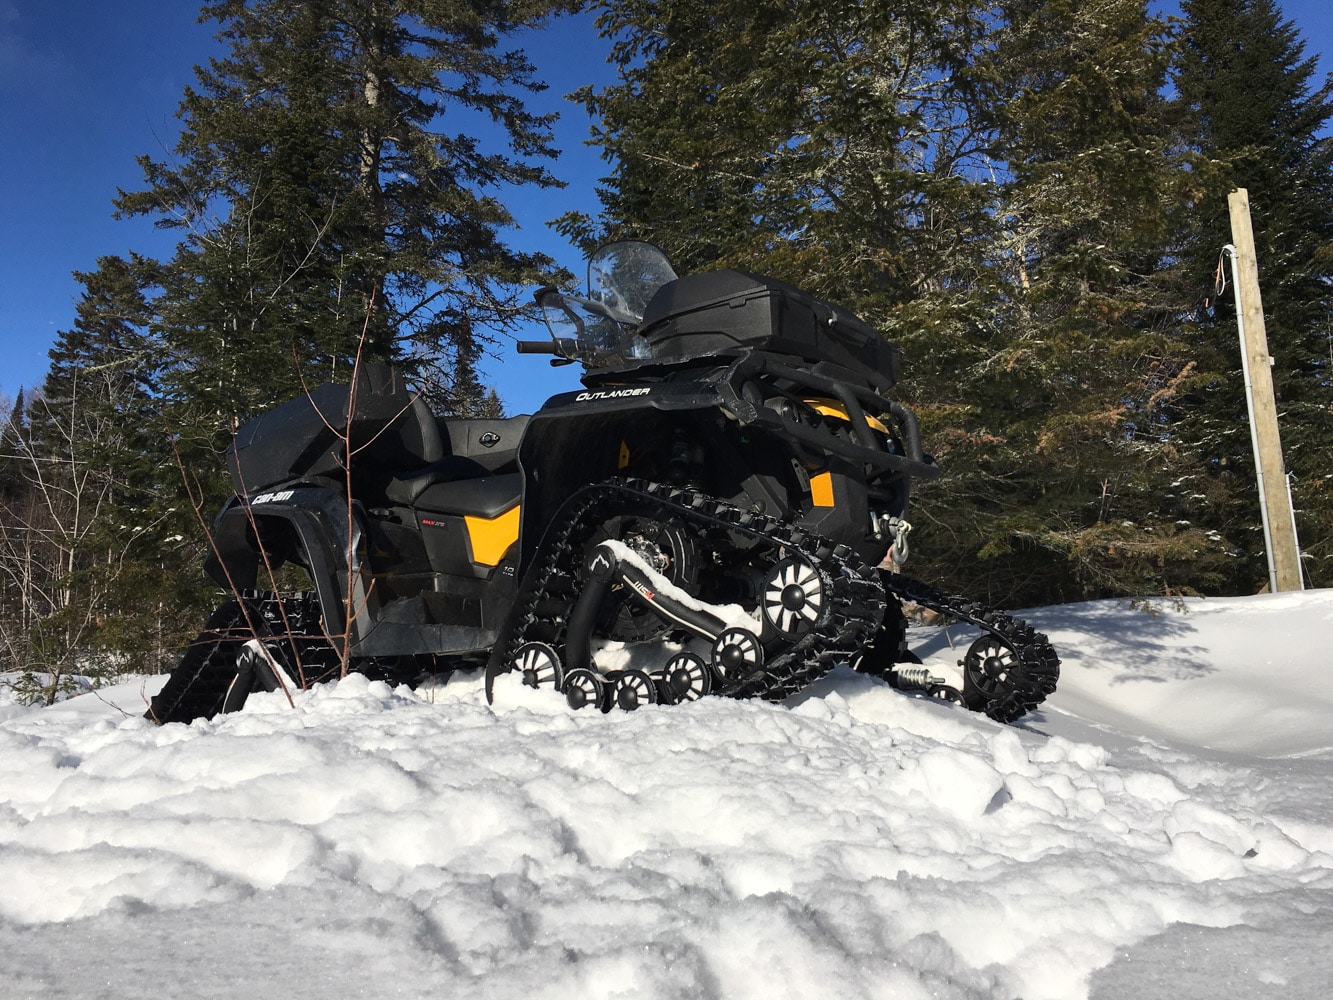 Tips for Winter Quad Riding